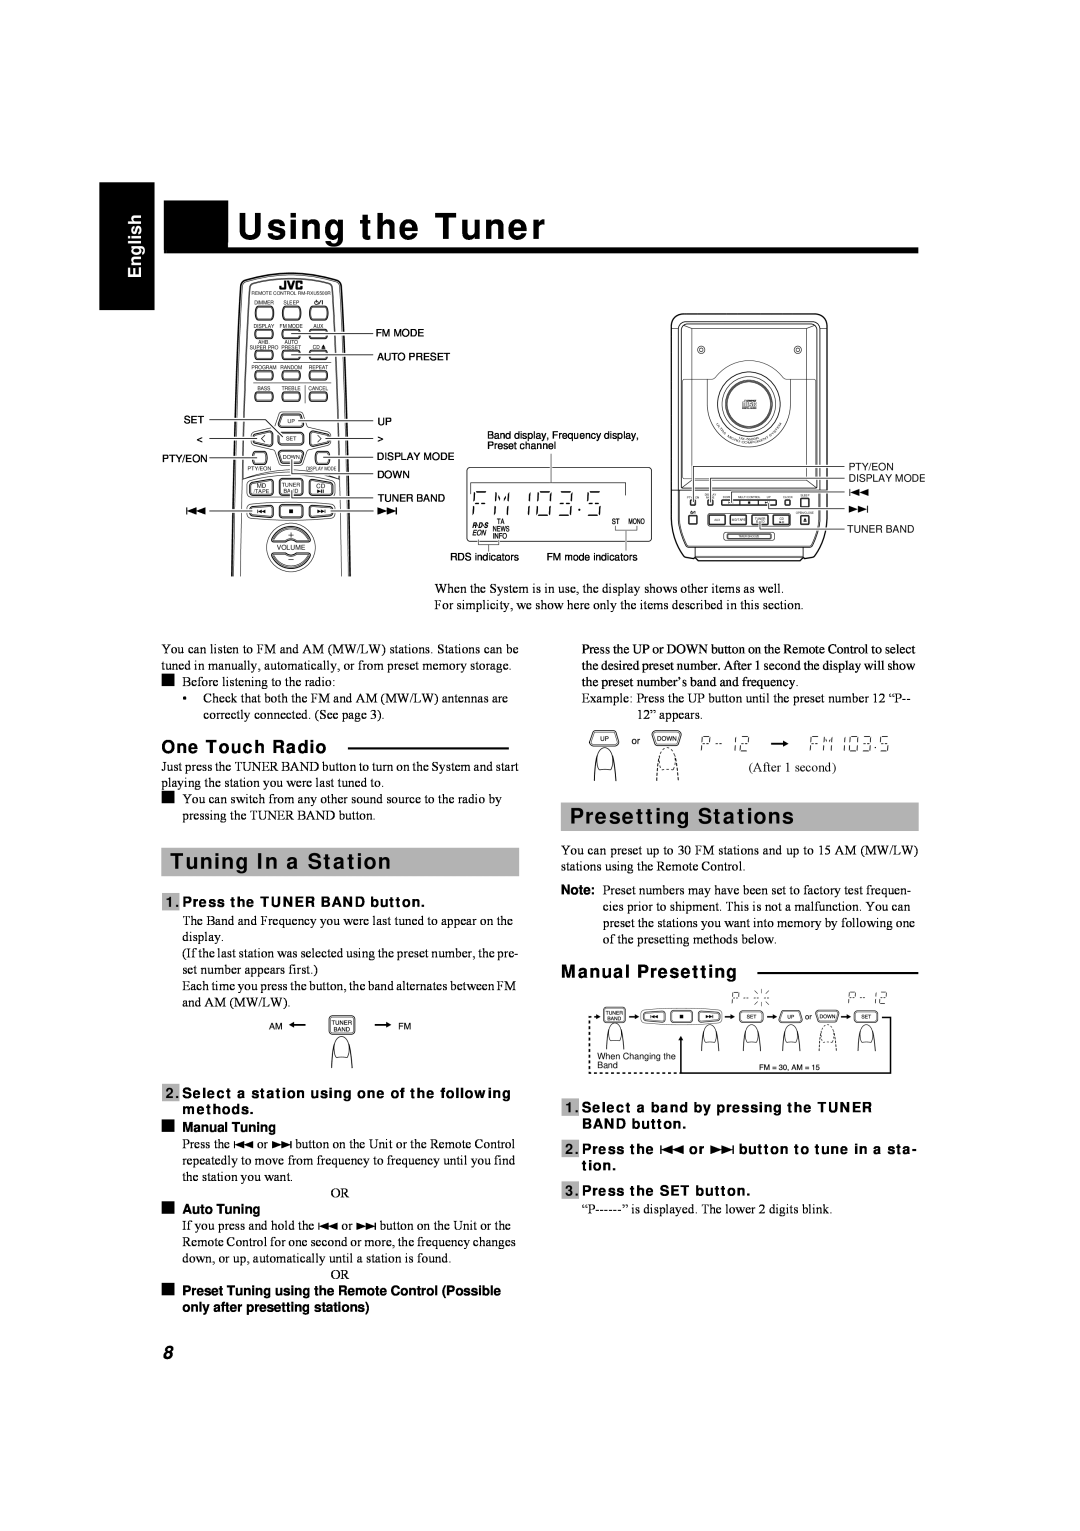 JVC UX-5500R manual Using the Tuner, Tuning In a Station, Presetting Stations, One Touch Radio, Manual Presetting, English 